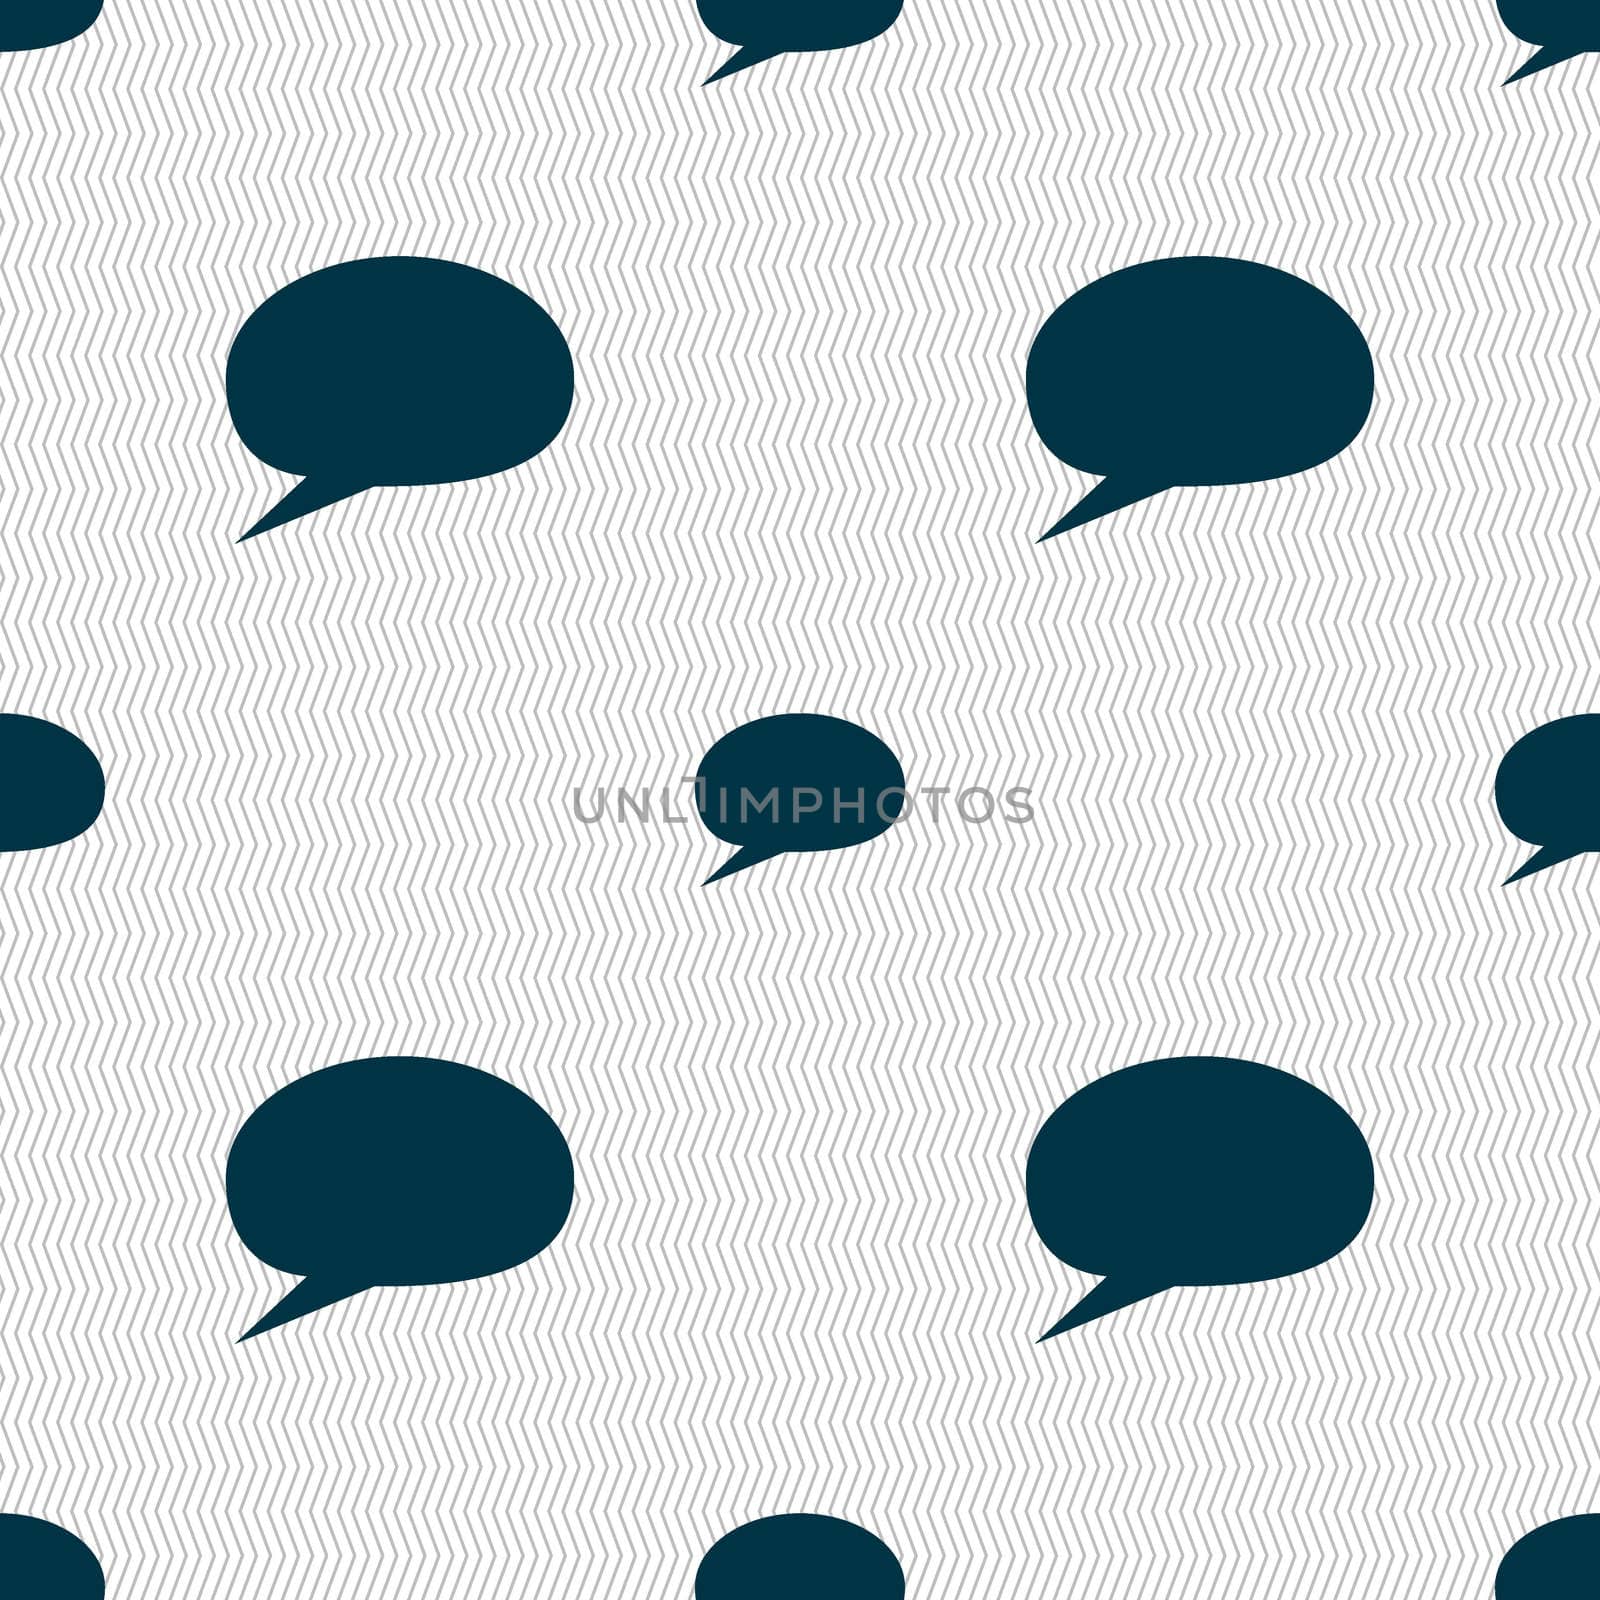 Speech bubble icons. Think cloud symbols. Seamless abstract background with geometric shapes. illustration